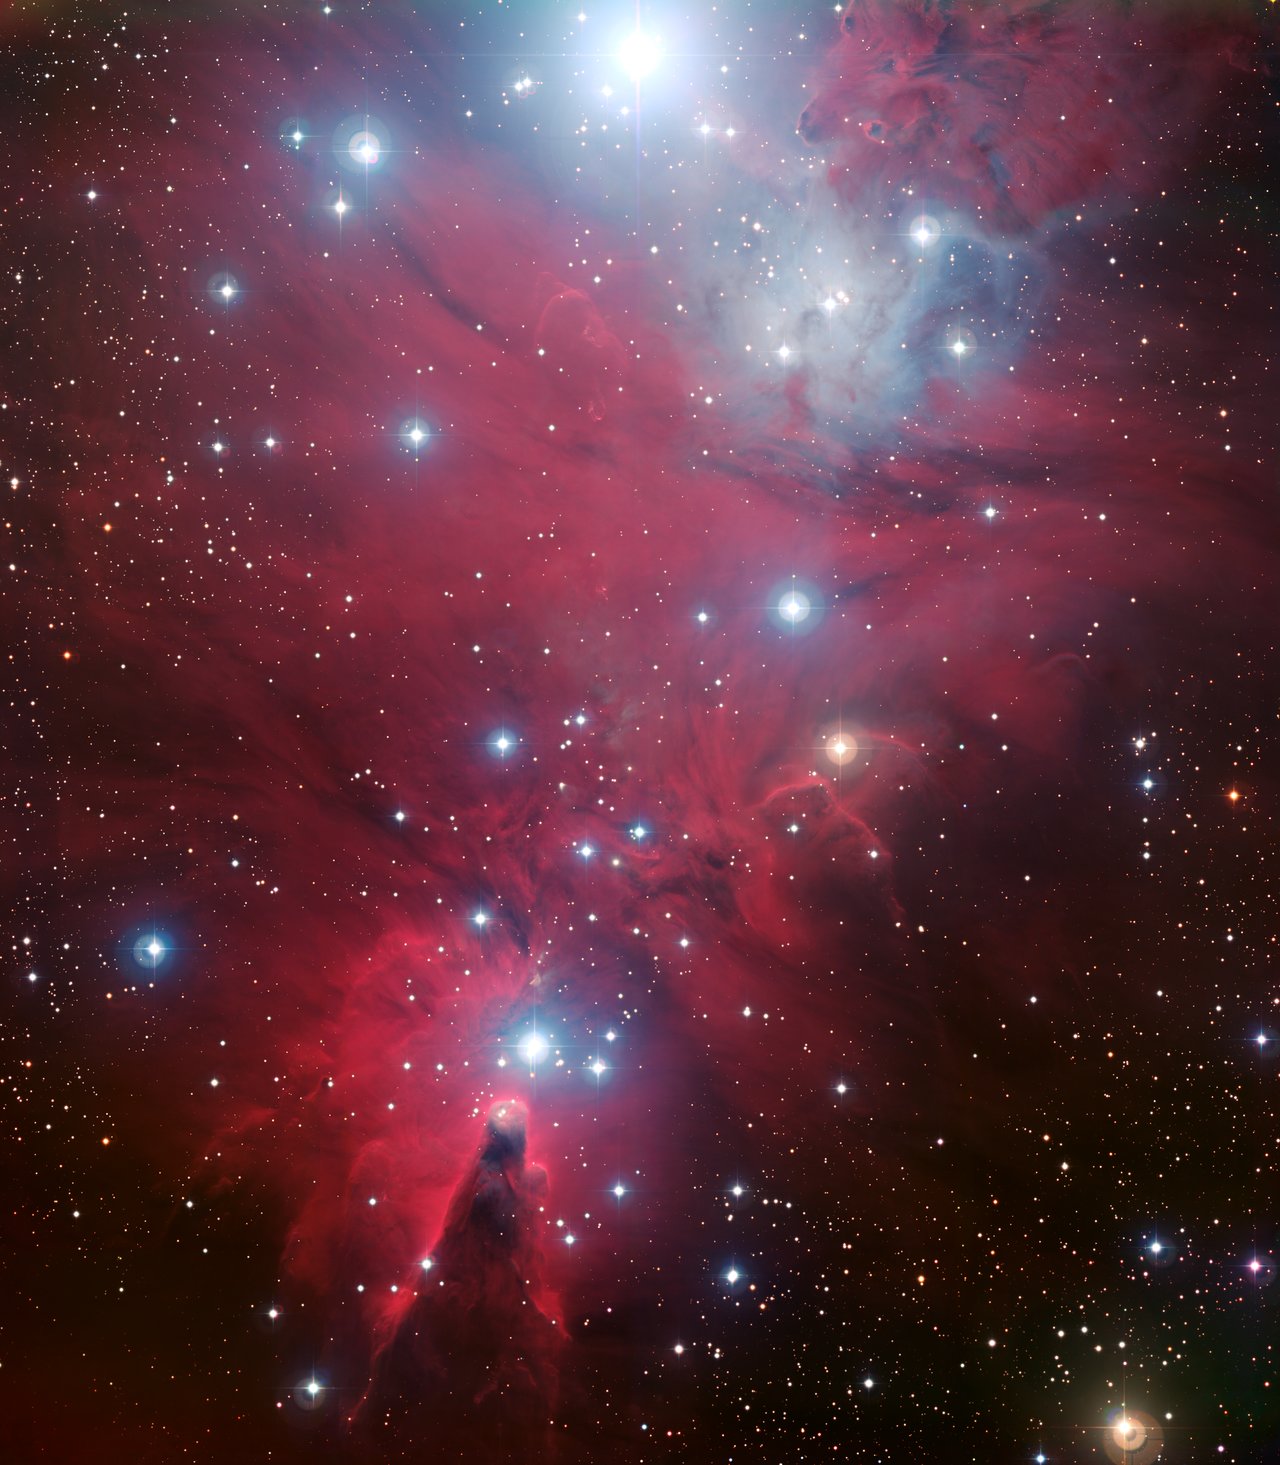 This colour image of the region known as NGC 2264 — an area of sky that includes the sparkling blue baubles of the Christmas Tree star cluster and the Cone Nebula — was created from data taken through four different filters (B, V, R and H-alpha) with the Wide Field Imager at ESO's La Silla Observatory, 2400 m high in the Atacama Desert of Chile in the foothills of the Andes. The image shows a region of space about 30 light-years across. This image is available as a mounted image in the ESOshop. #L